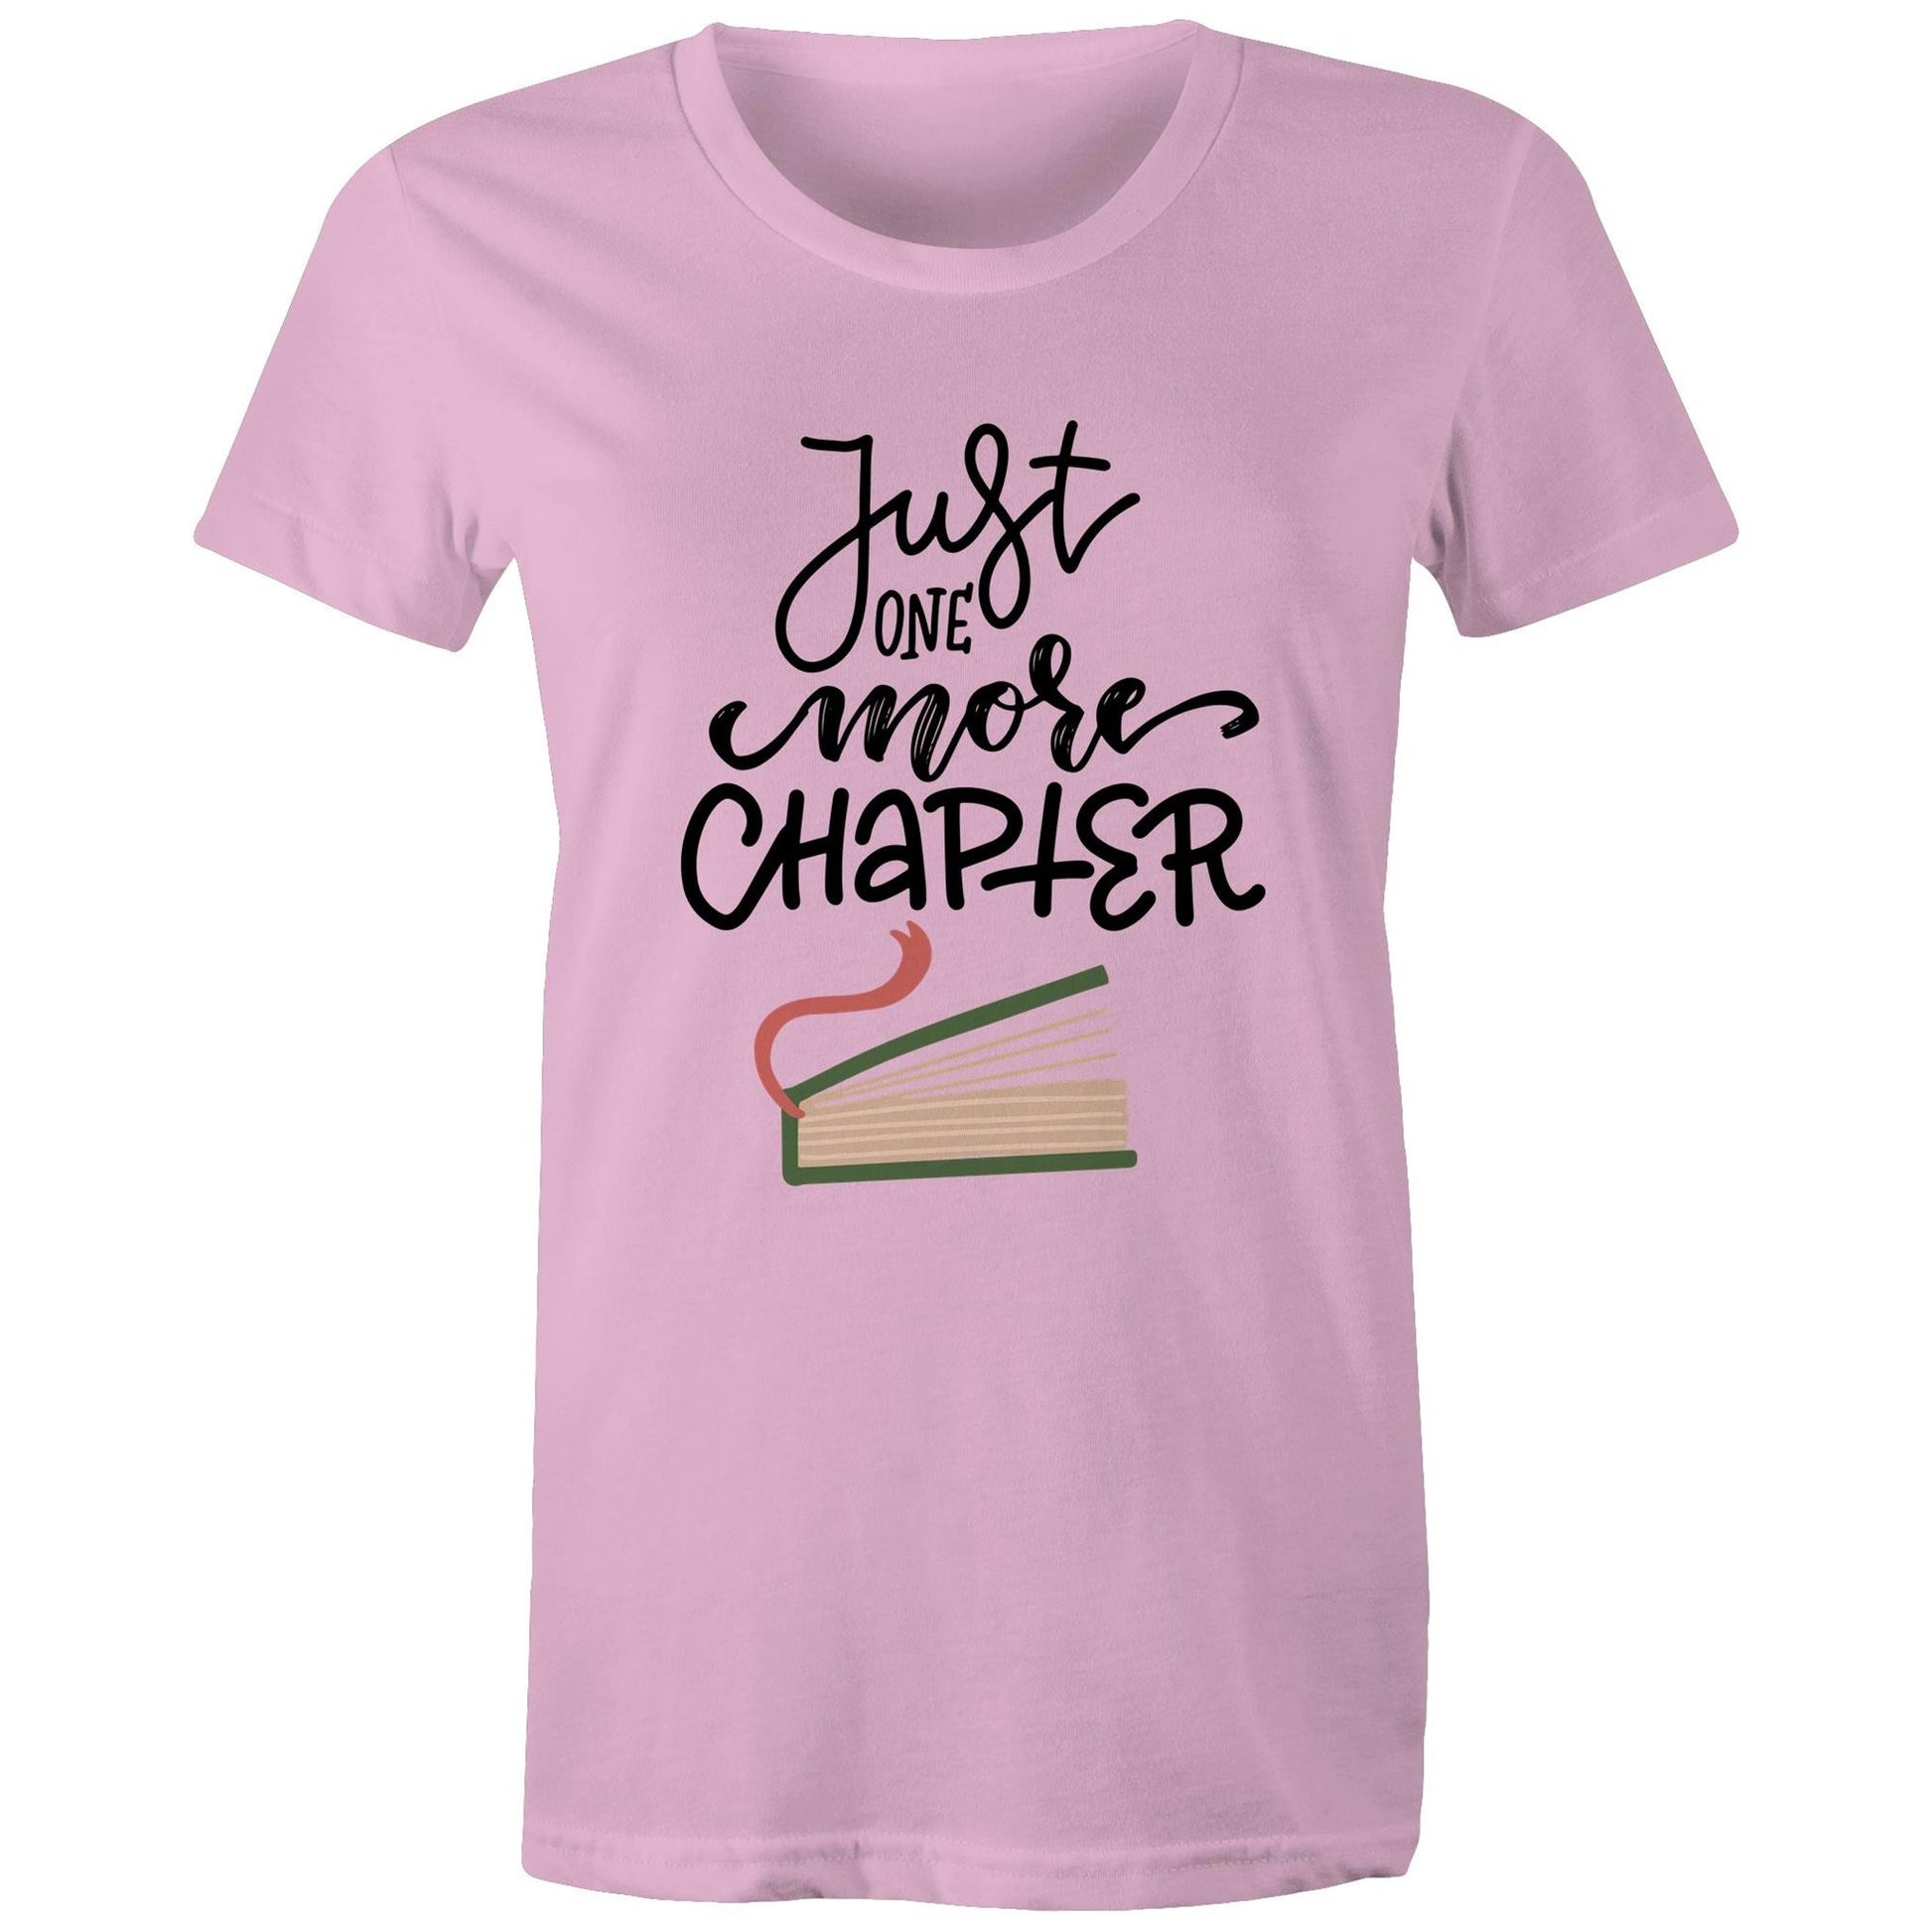 Just One More Chapter - Womens T-shirt Pink Womens T-shirt Reading